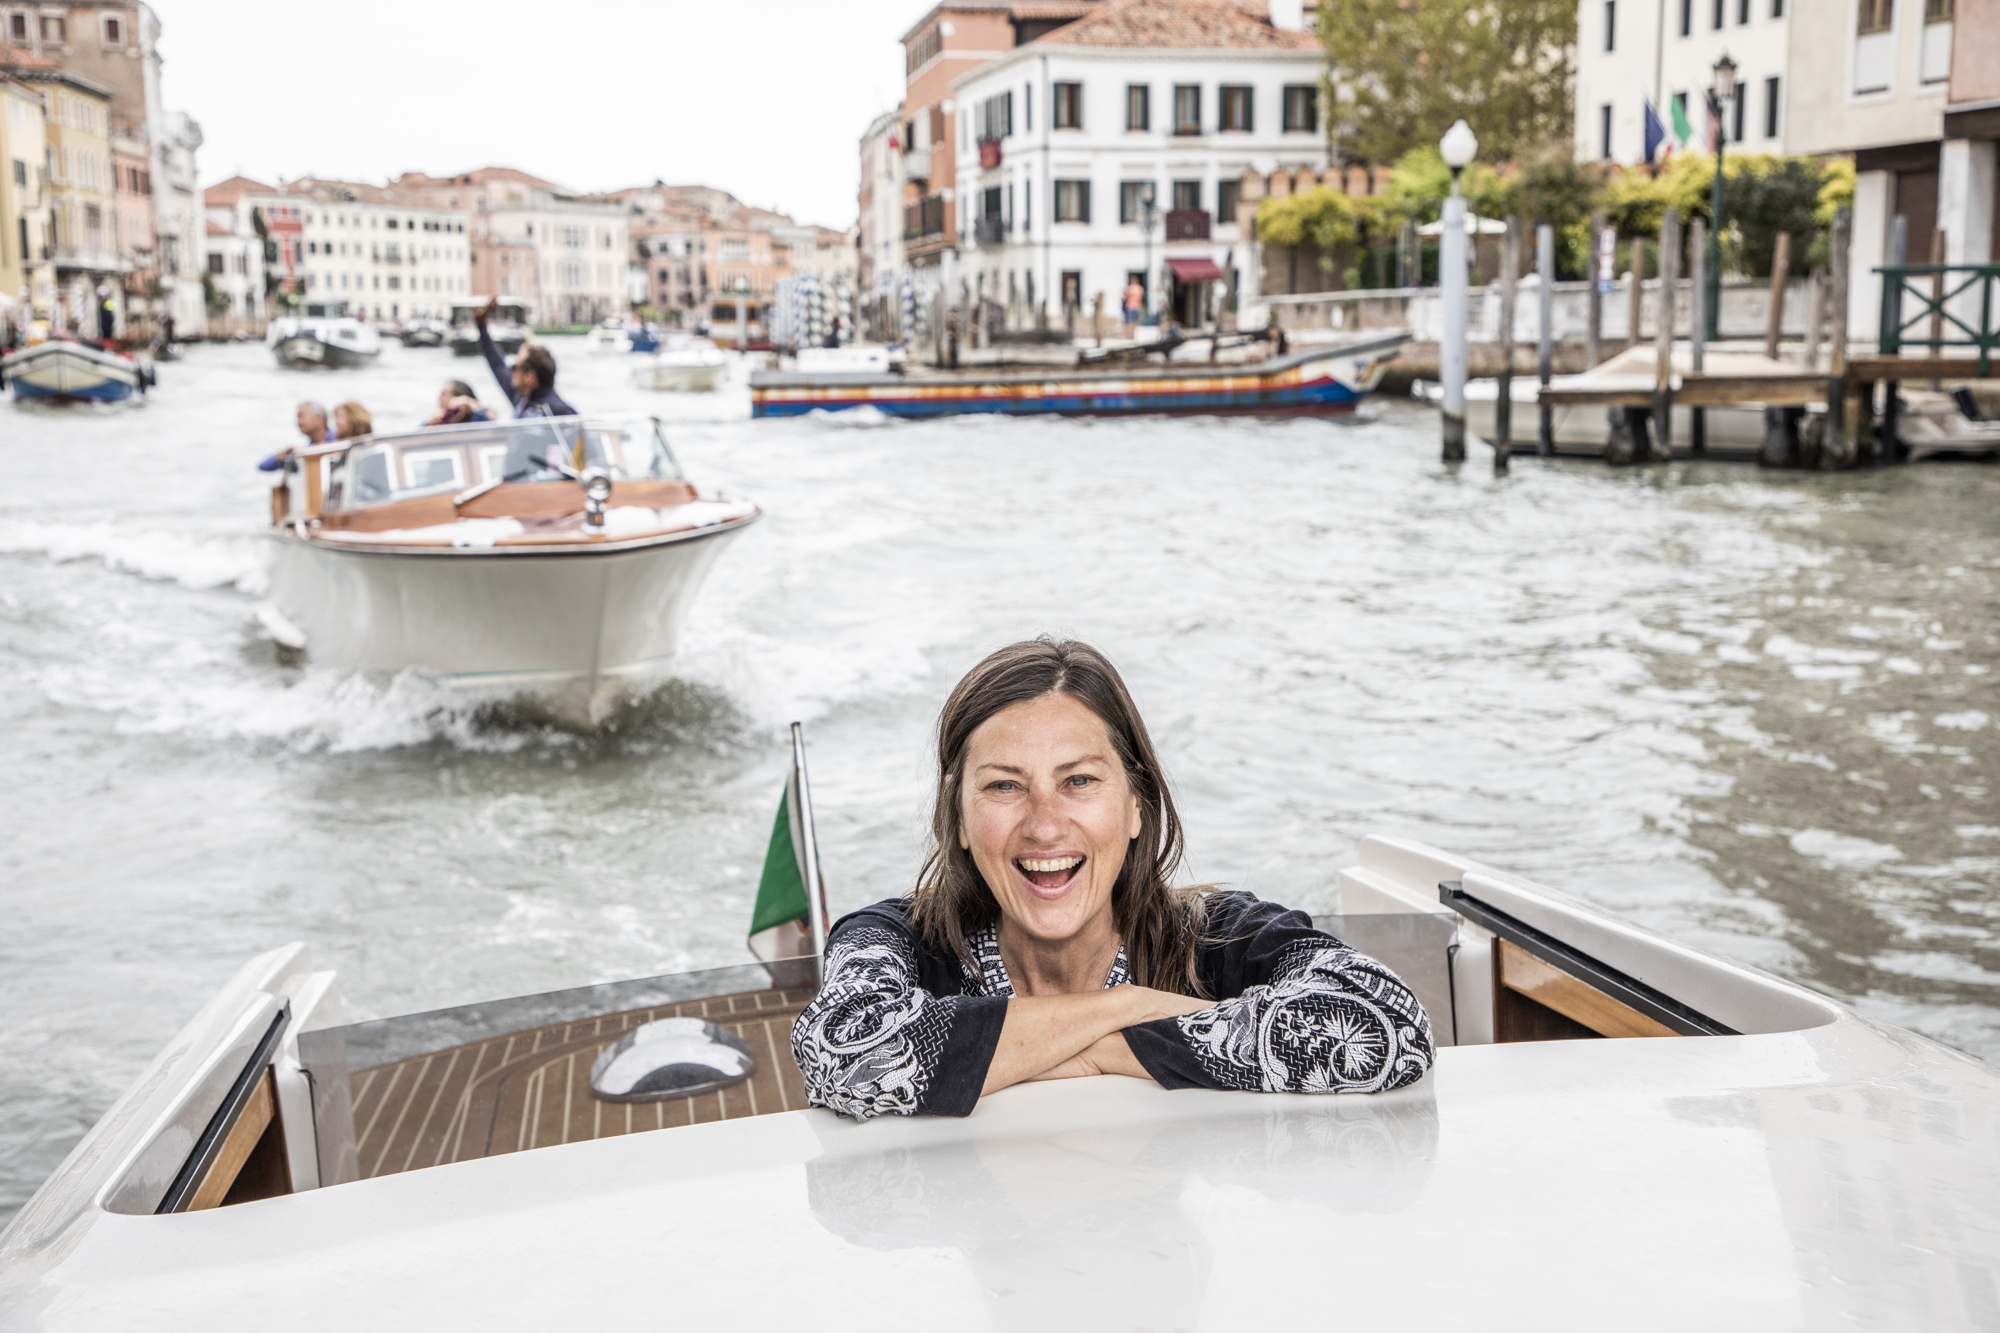 Carla Coulson rides through Venice in a water taxi smiling with joy